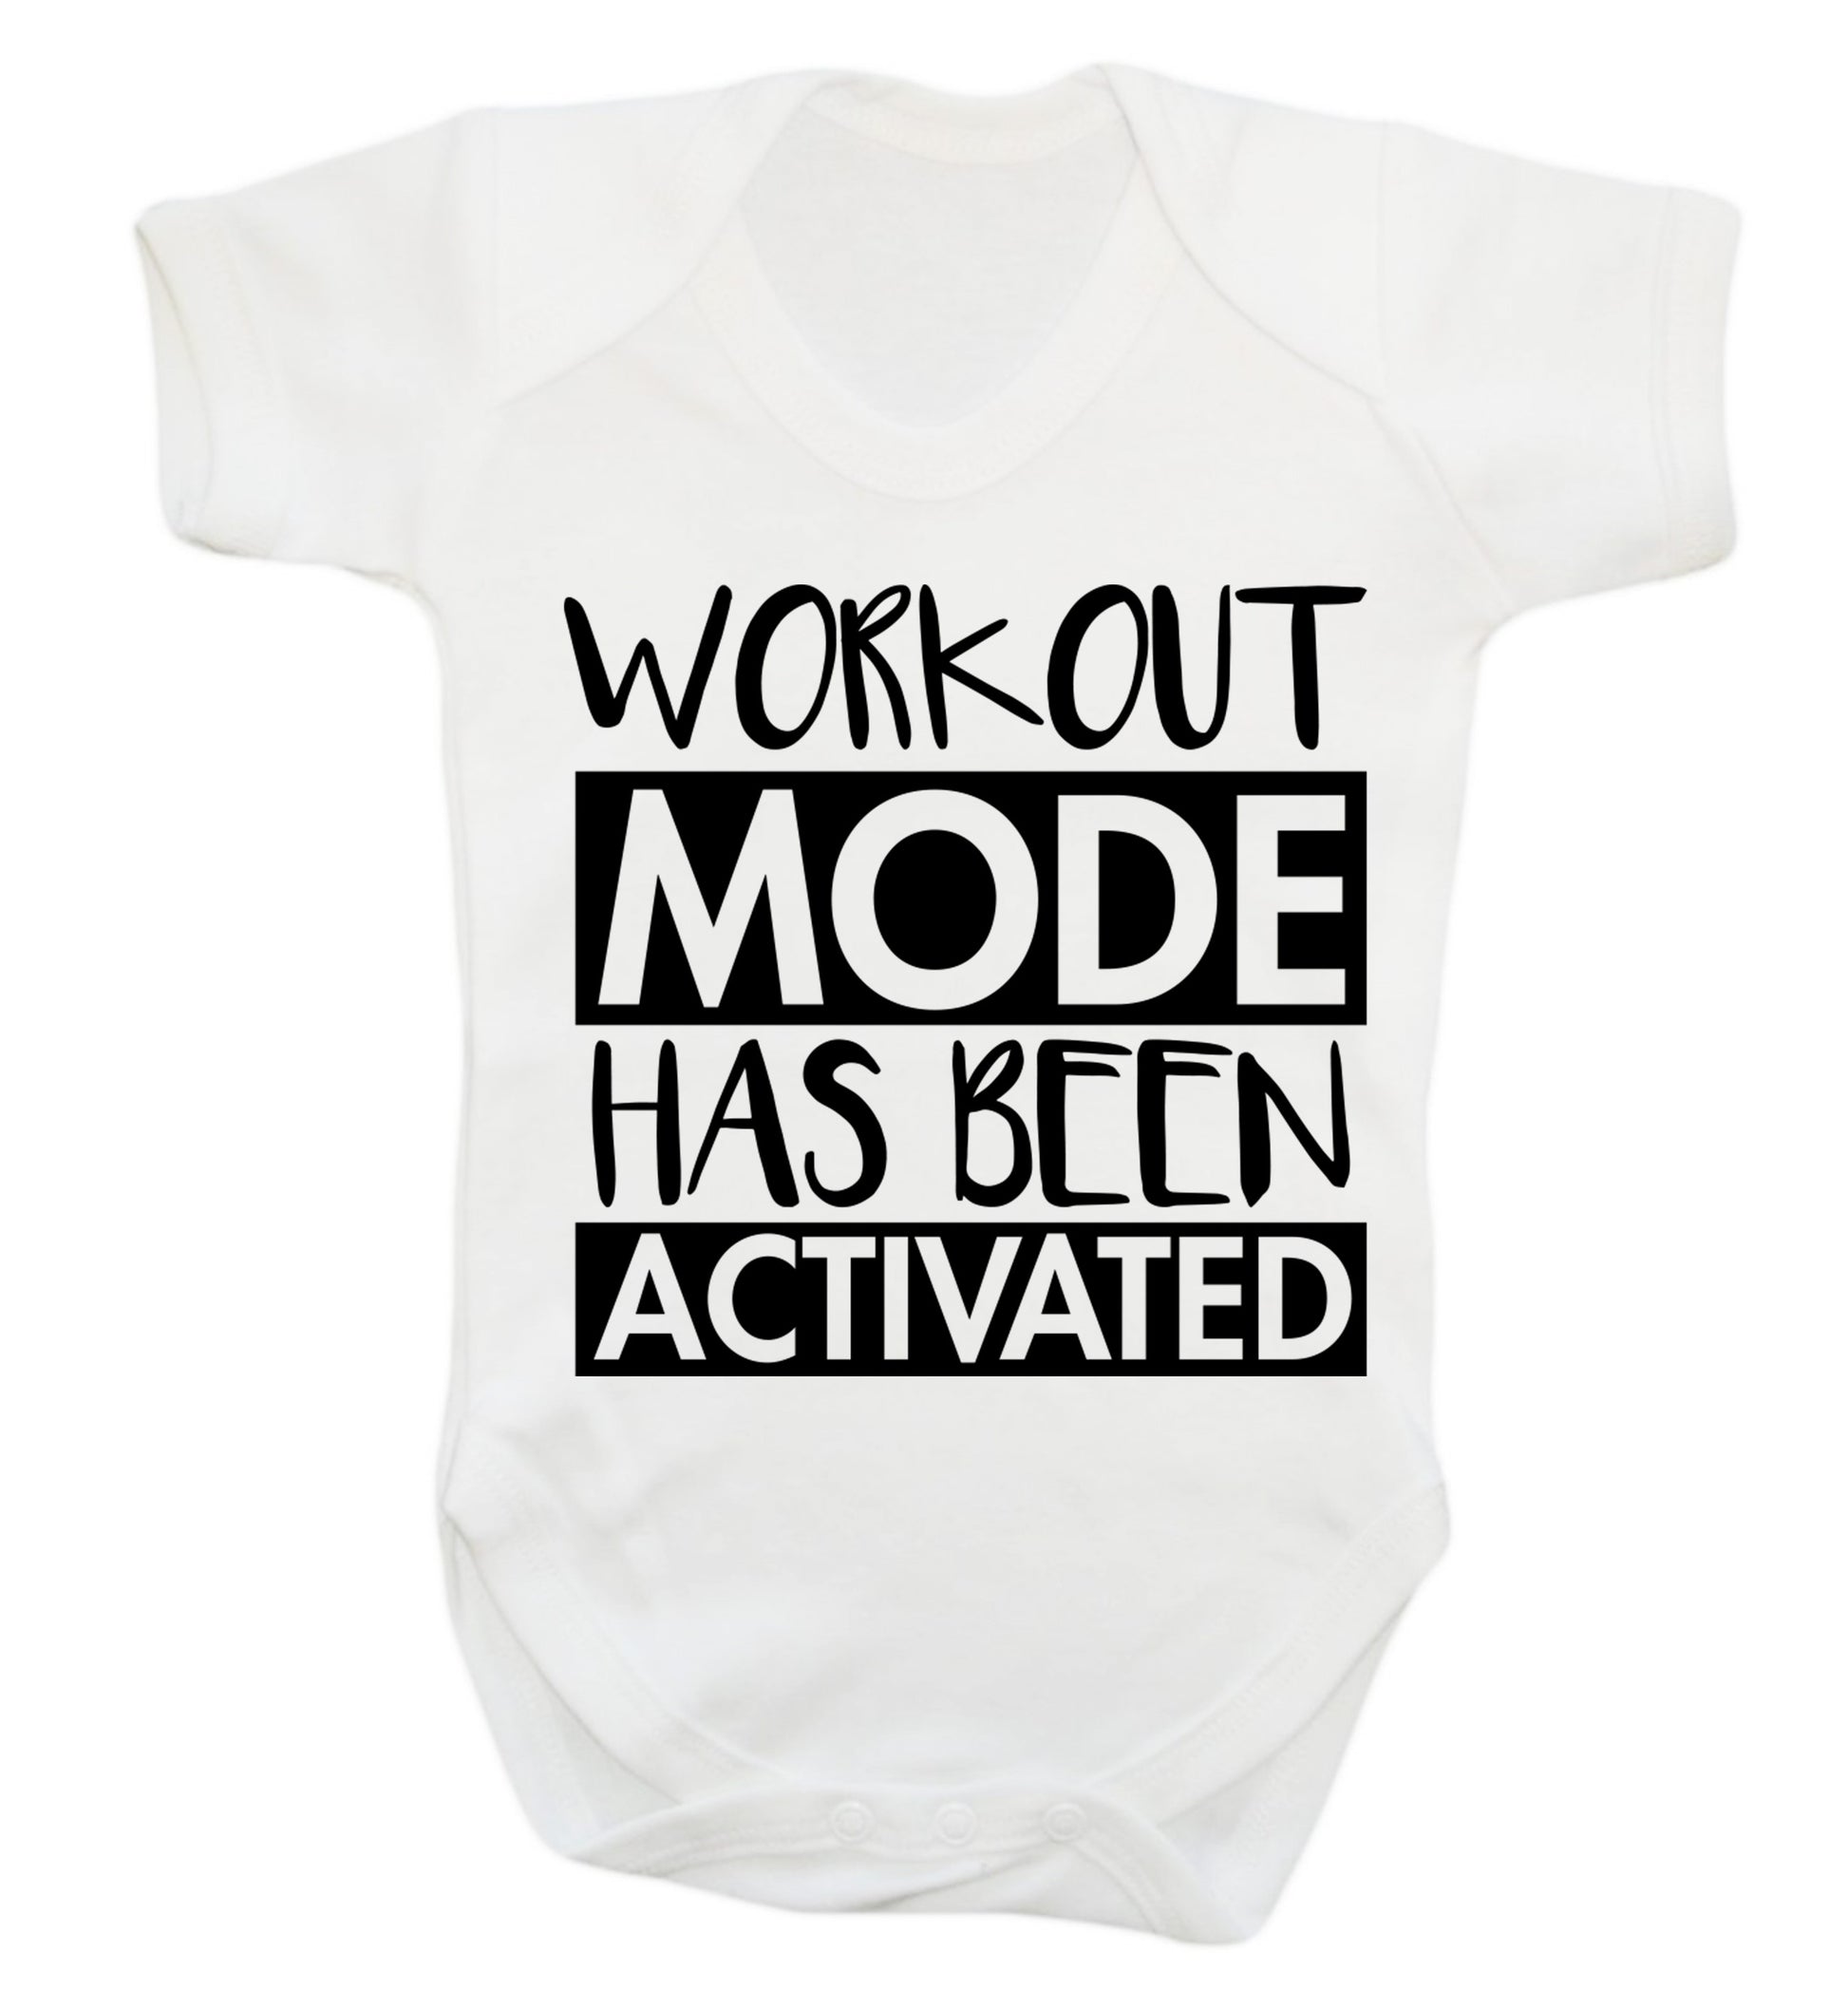 Workout mode has been activated Baby Vest white 18-24 months